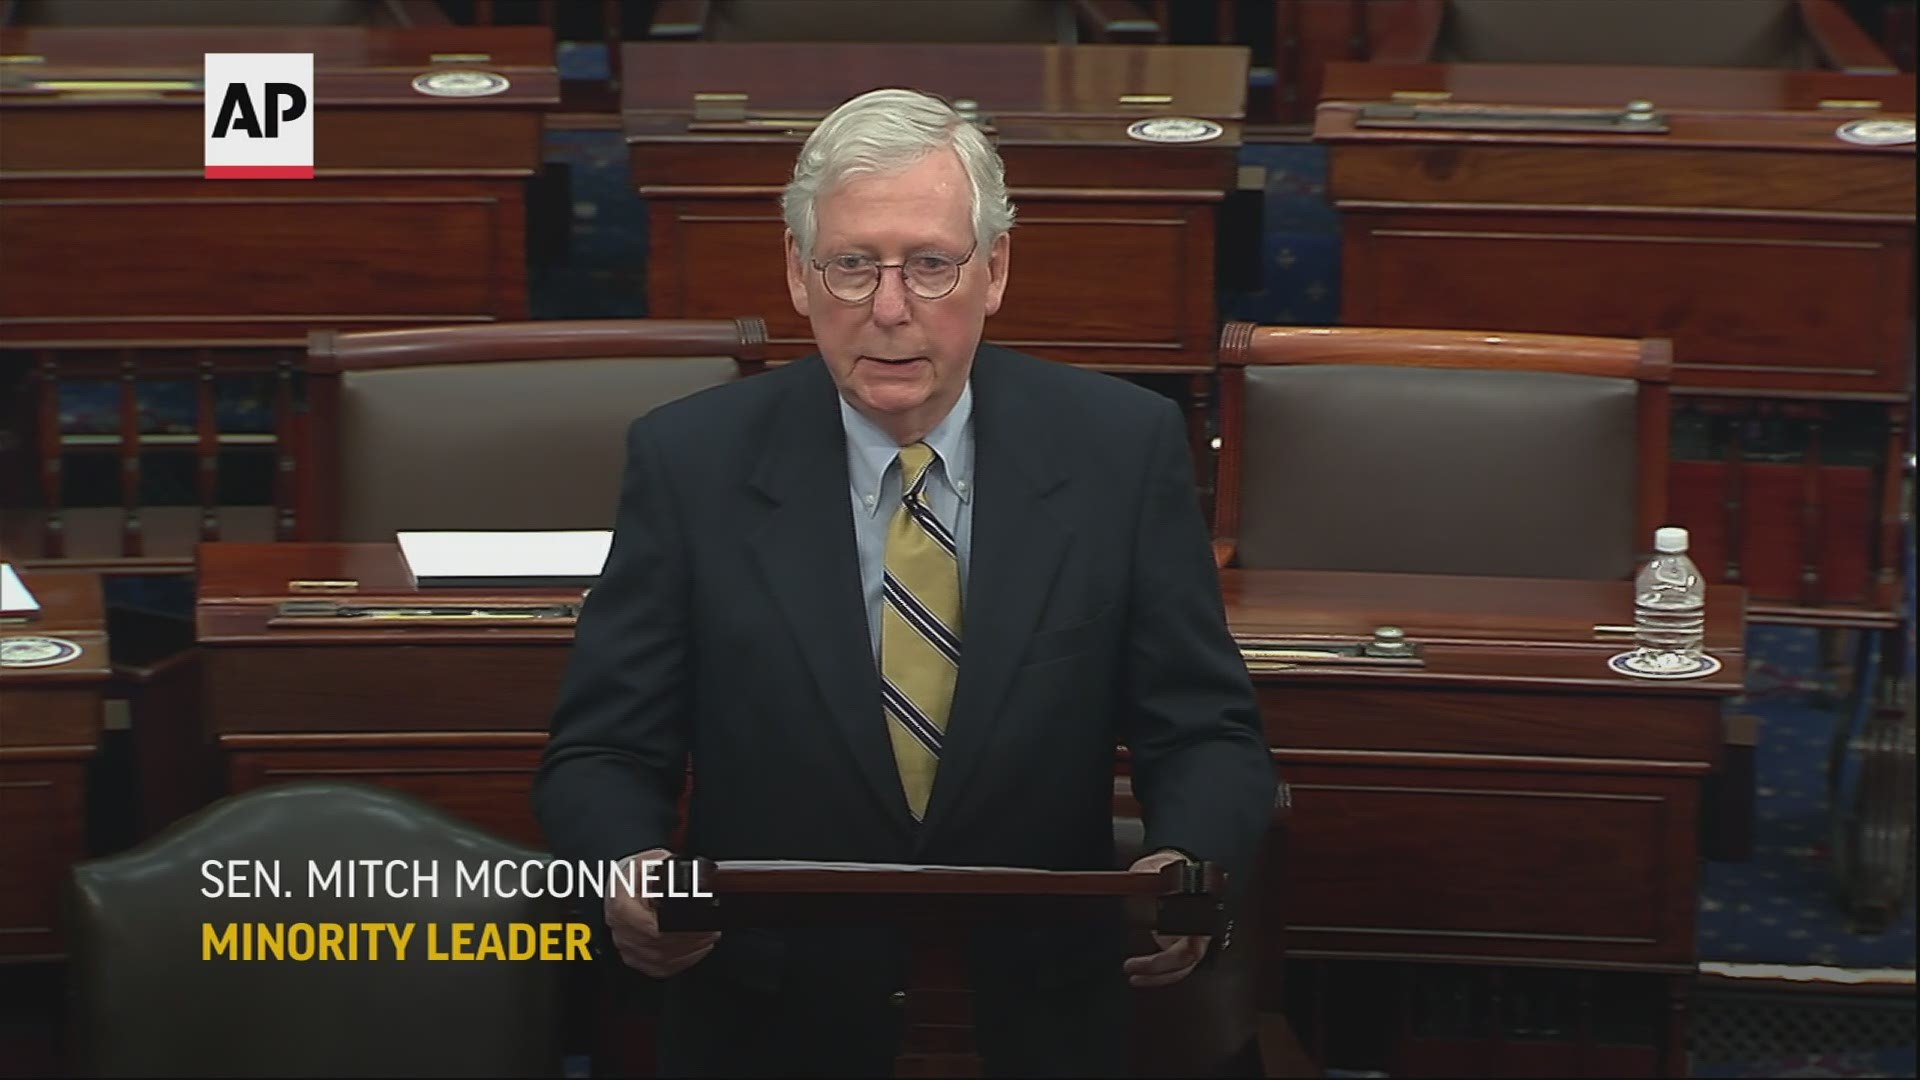 McConnell said he voted to acquit Donald Trump because he believes the Senate had no jurisdiction over a former president.